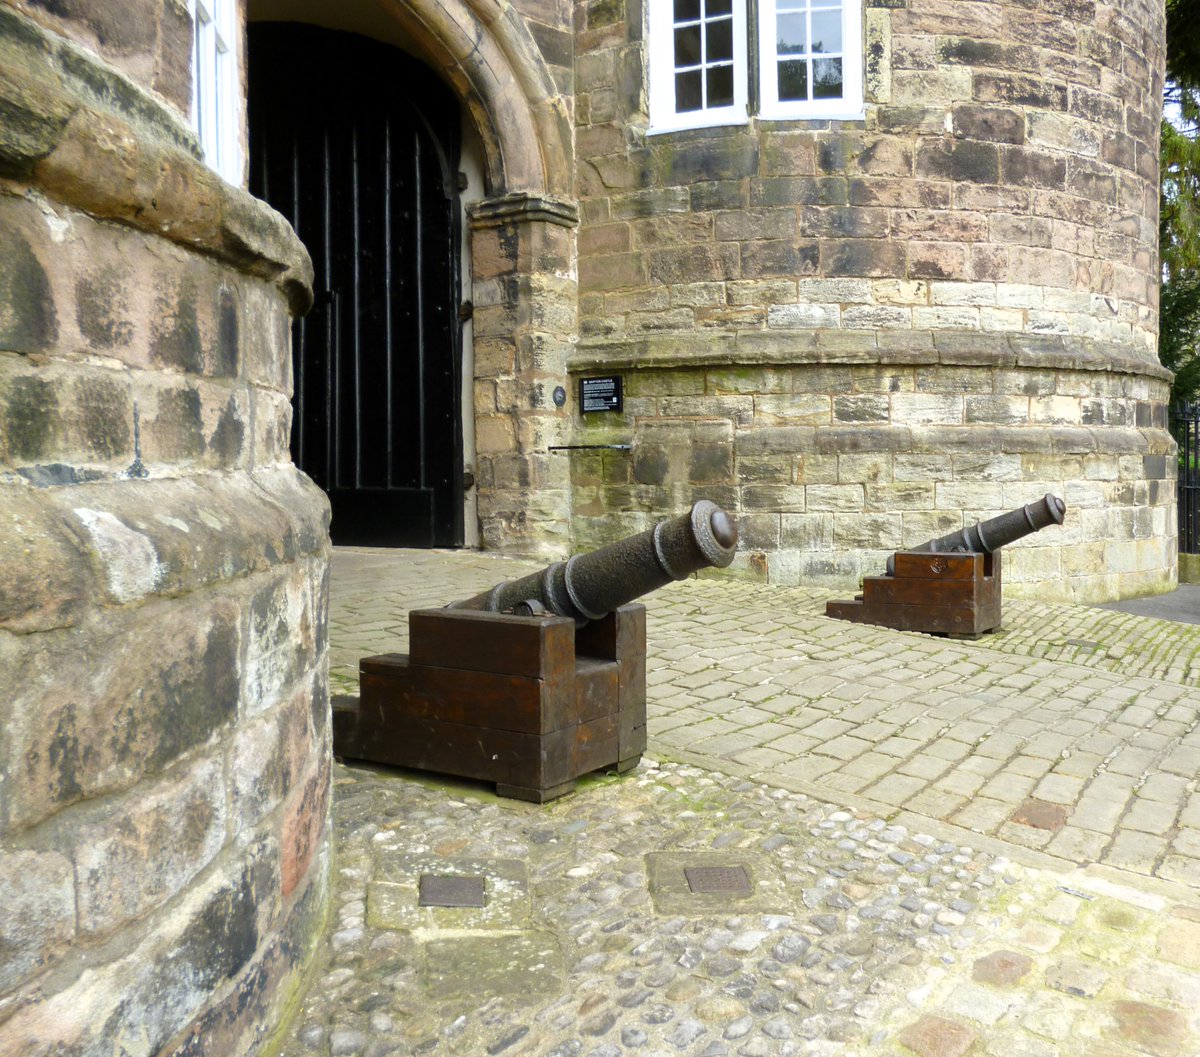 The entrance to Skipton Castle.